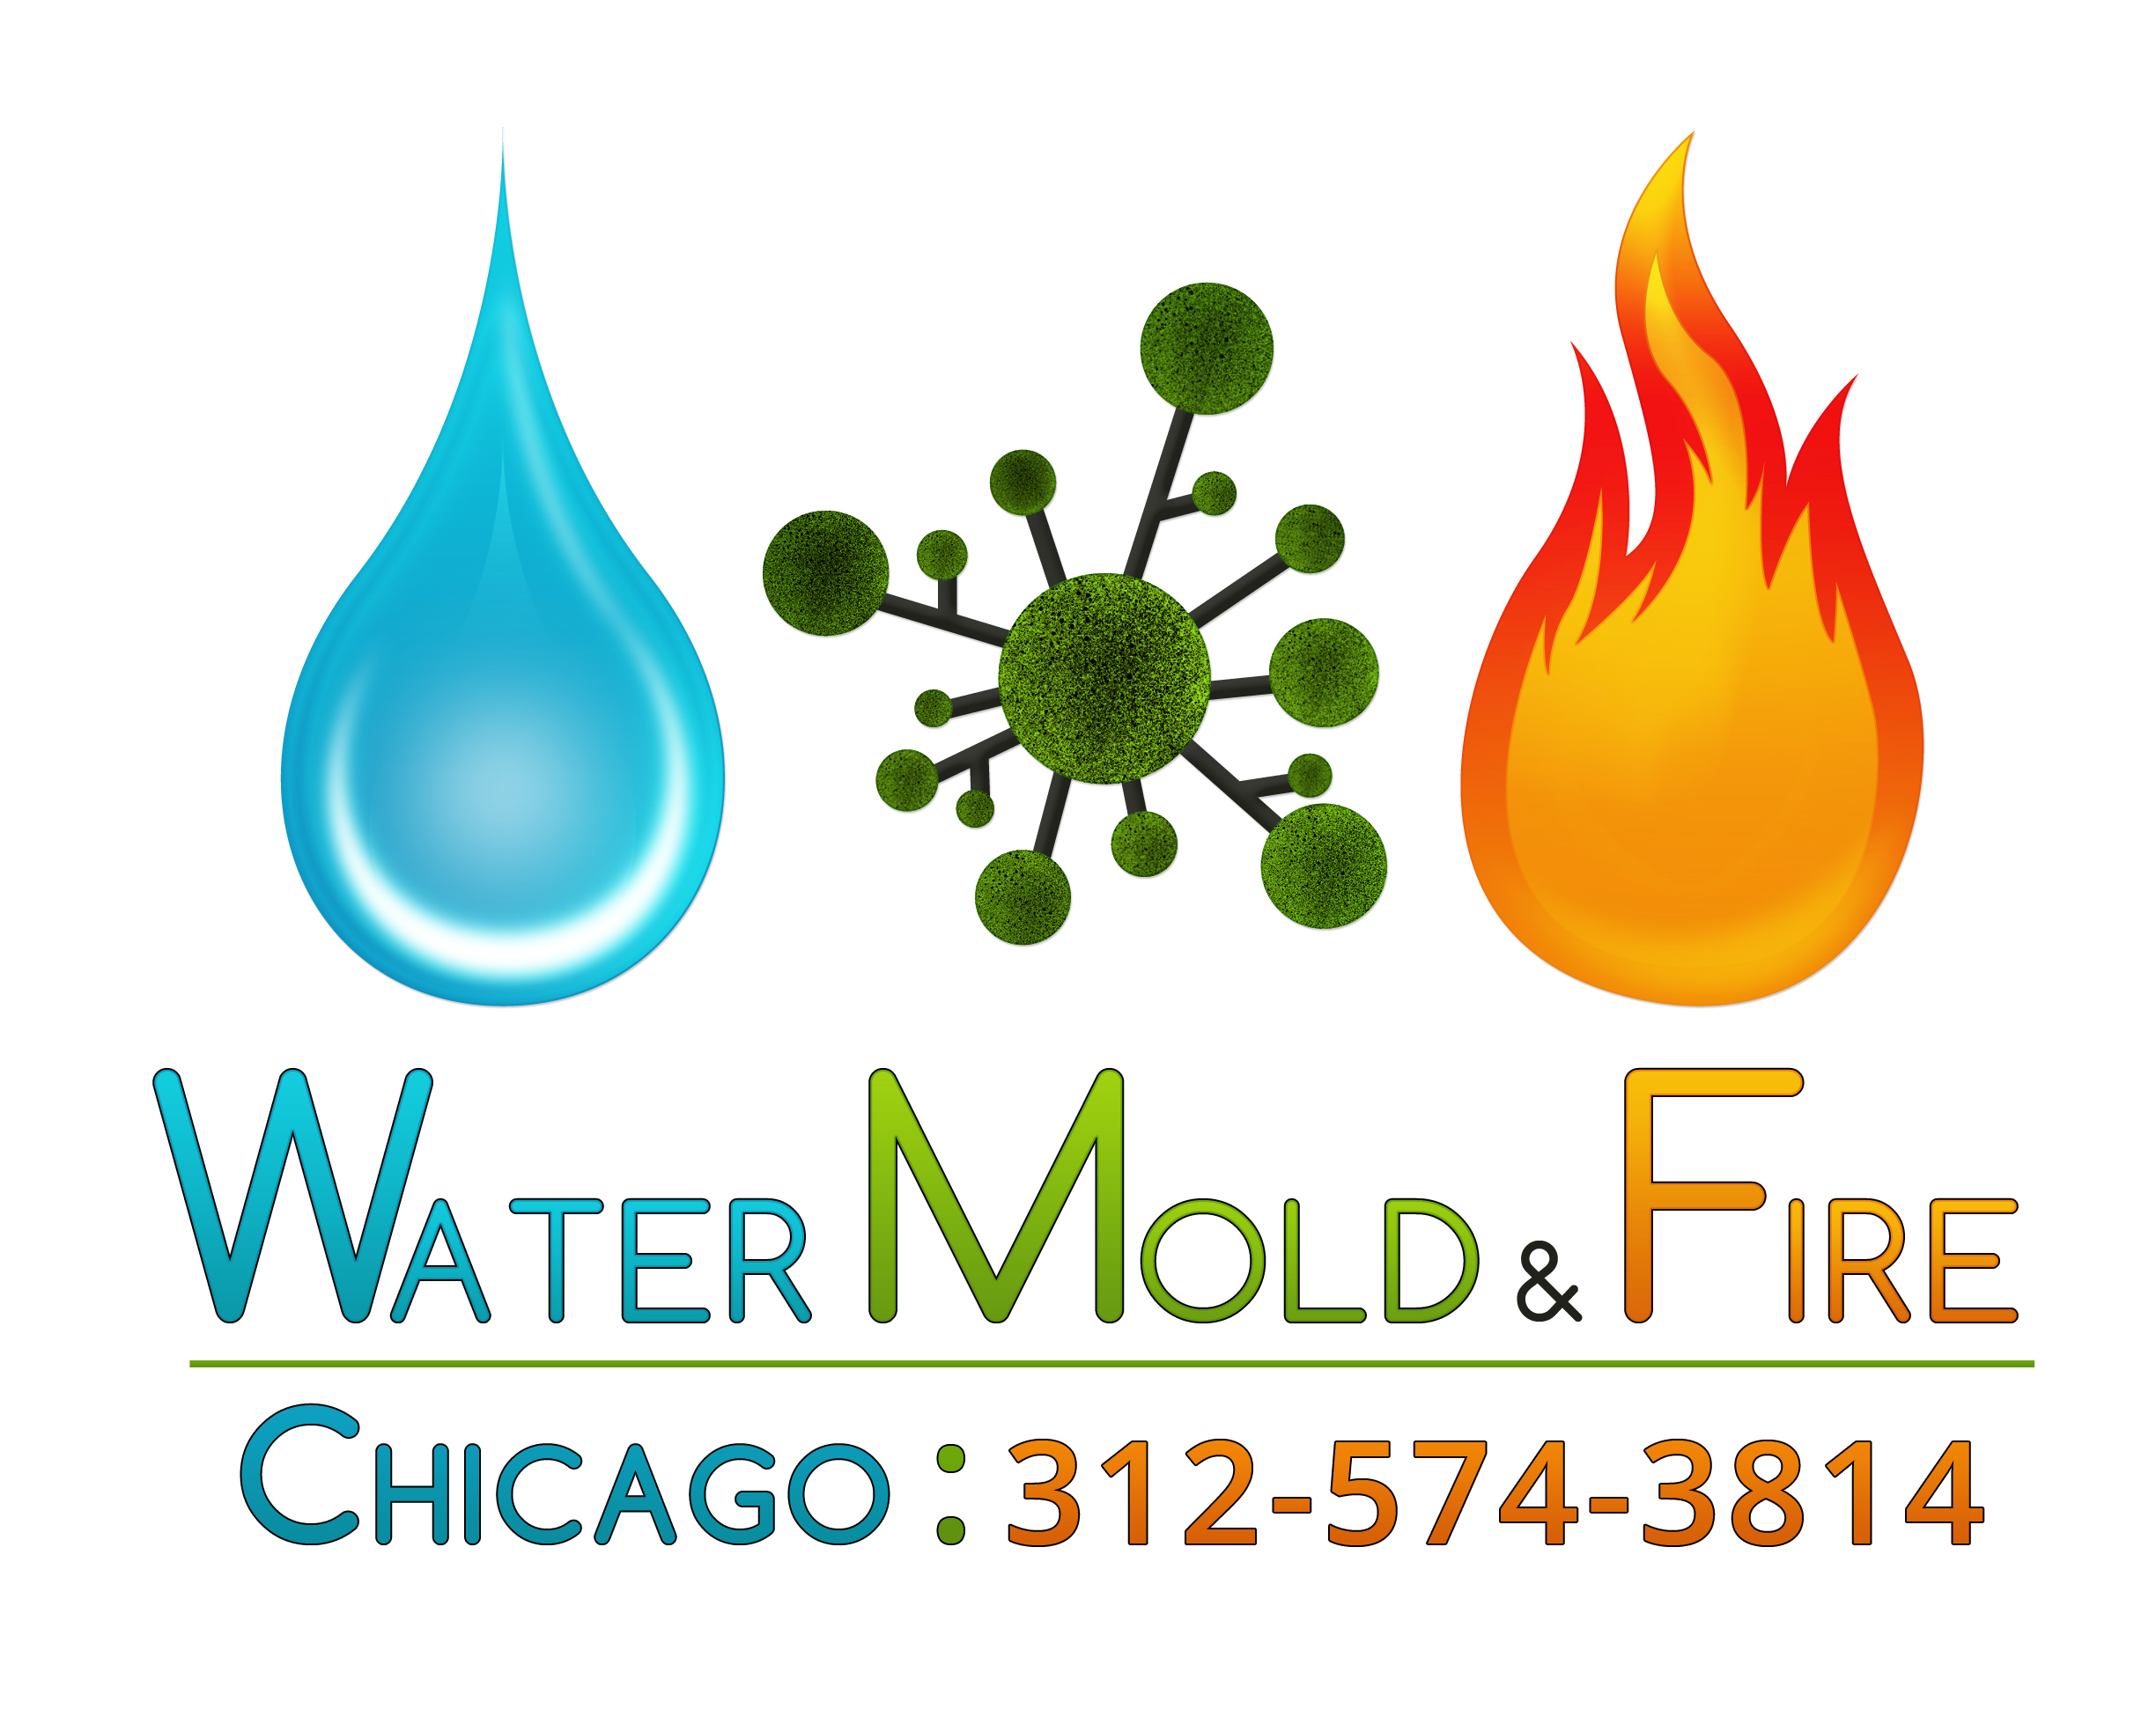 Water Mold & Fire Chicago